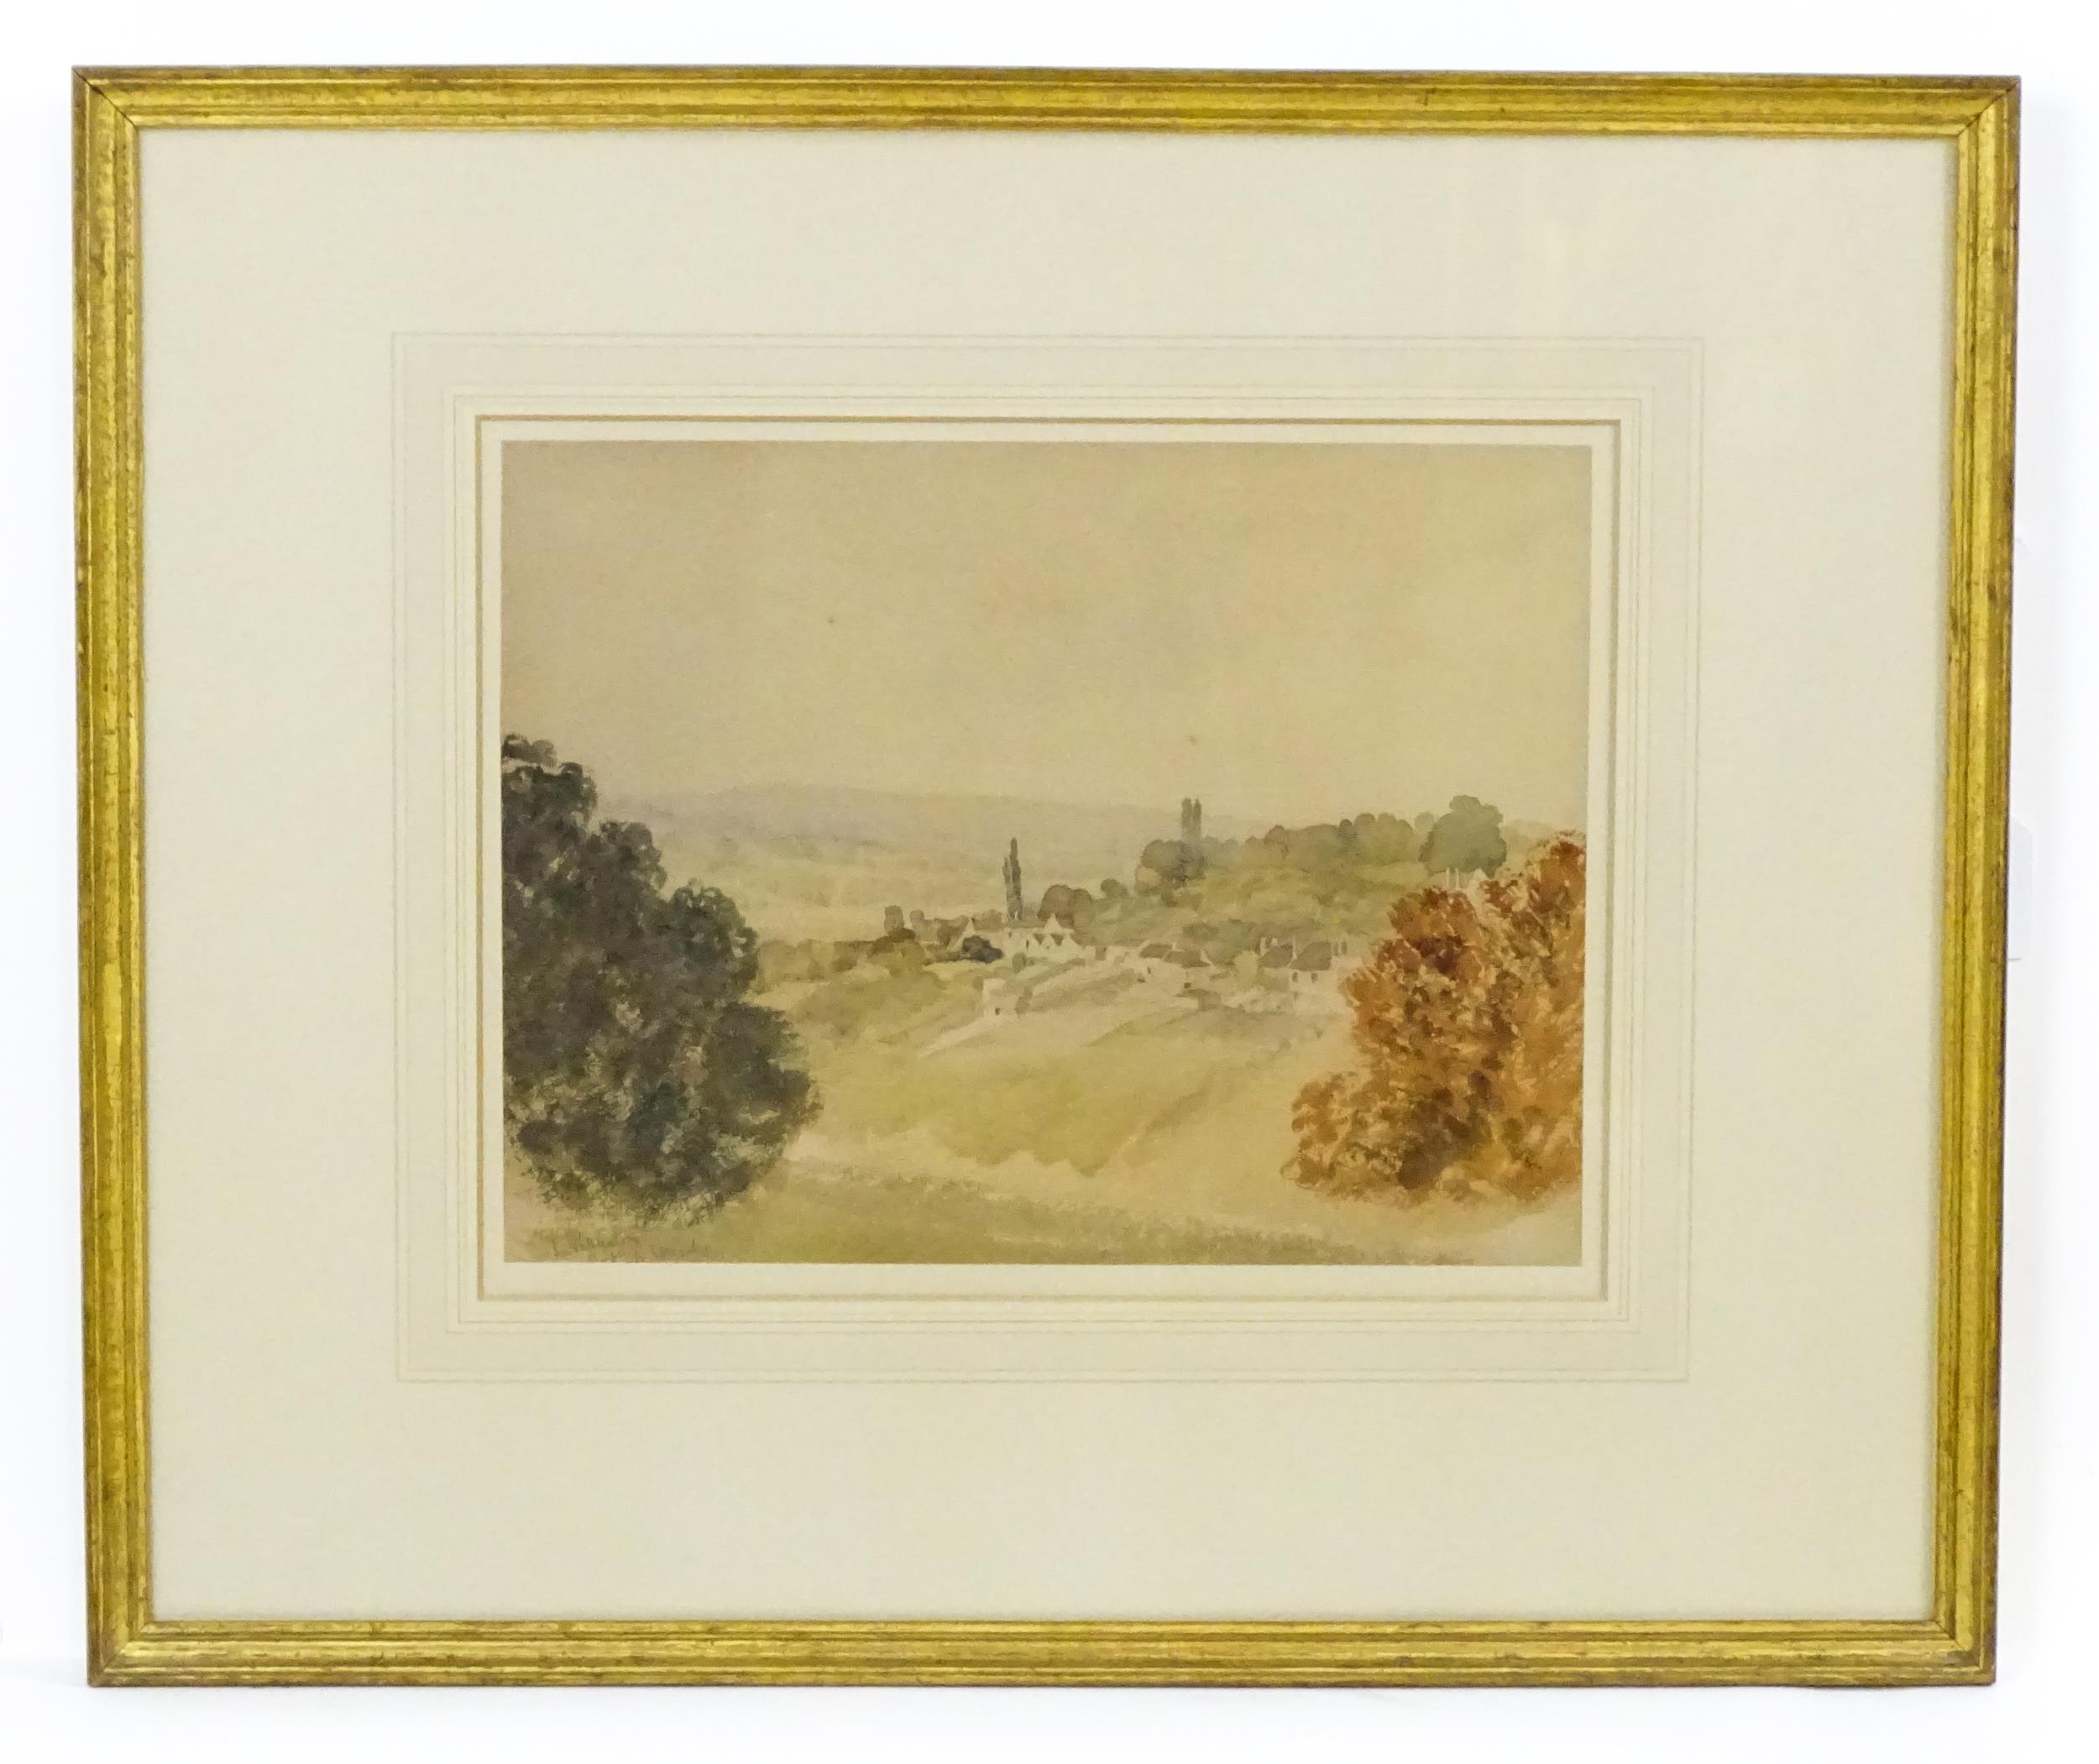 G. Marks, 19th century, Watercolour, Batheaston (Avon and Bath), A view of the village from across